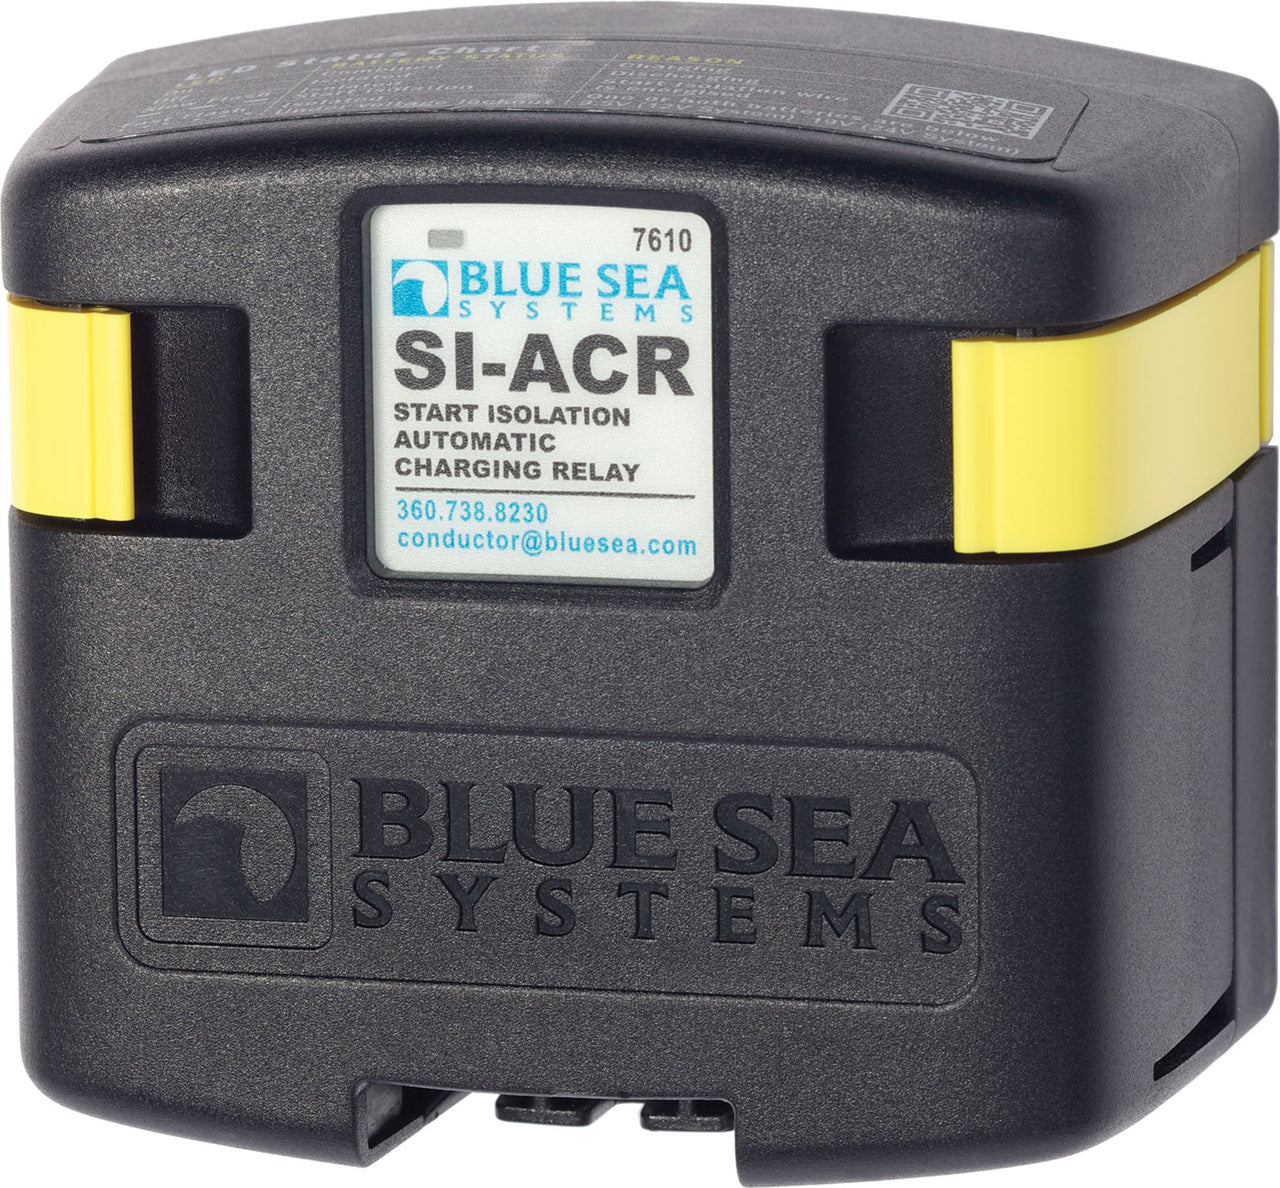 Blue Sea SI Series Automatic Charging Relay 7610